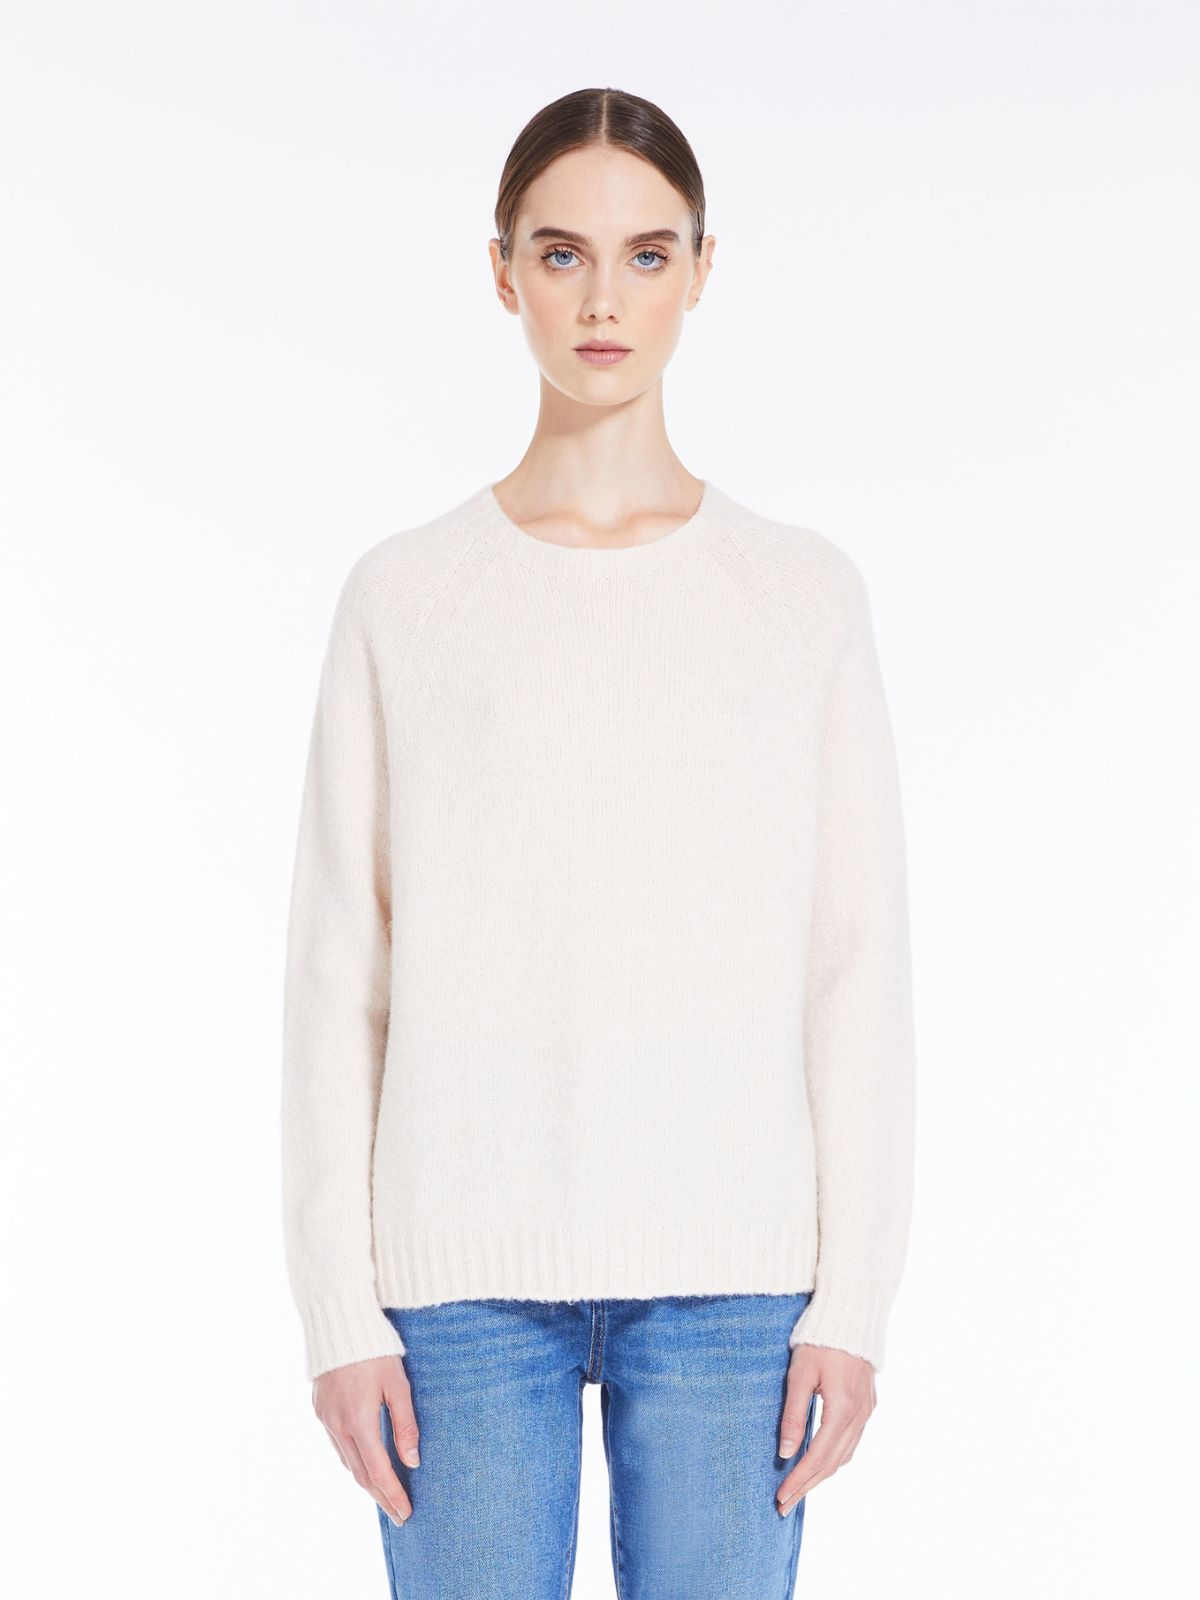 Soft knit top in alpaca and cotton - IVORY - Weekend Max Mara - 2